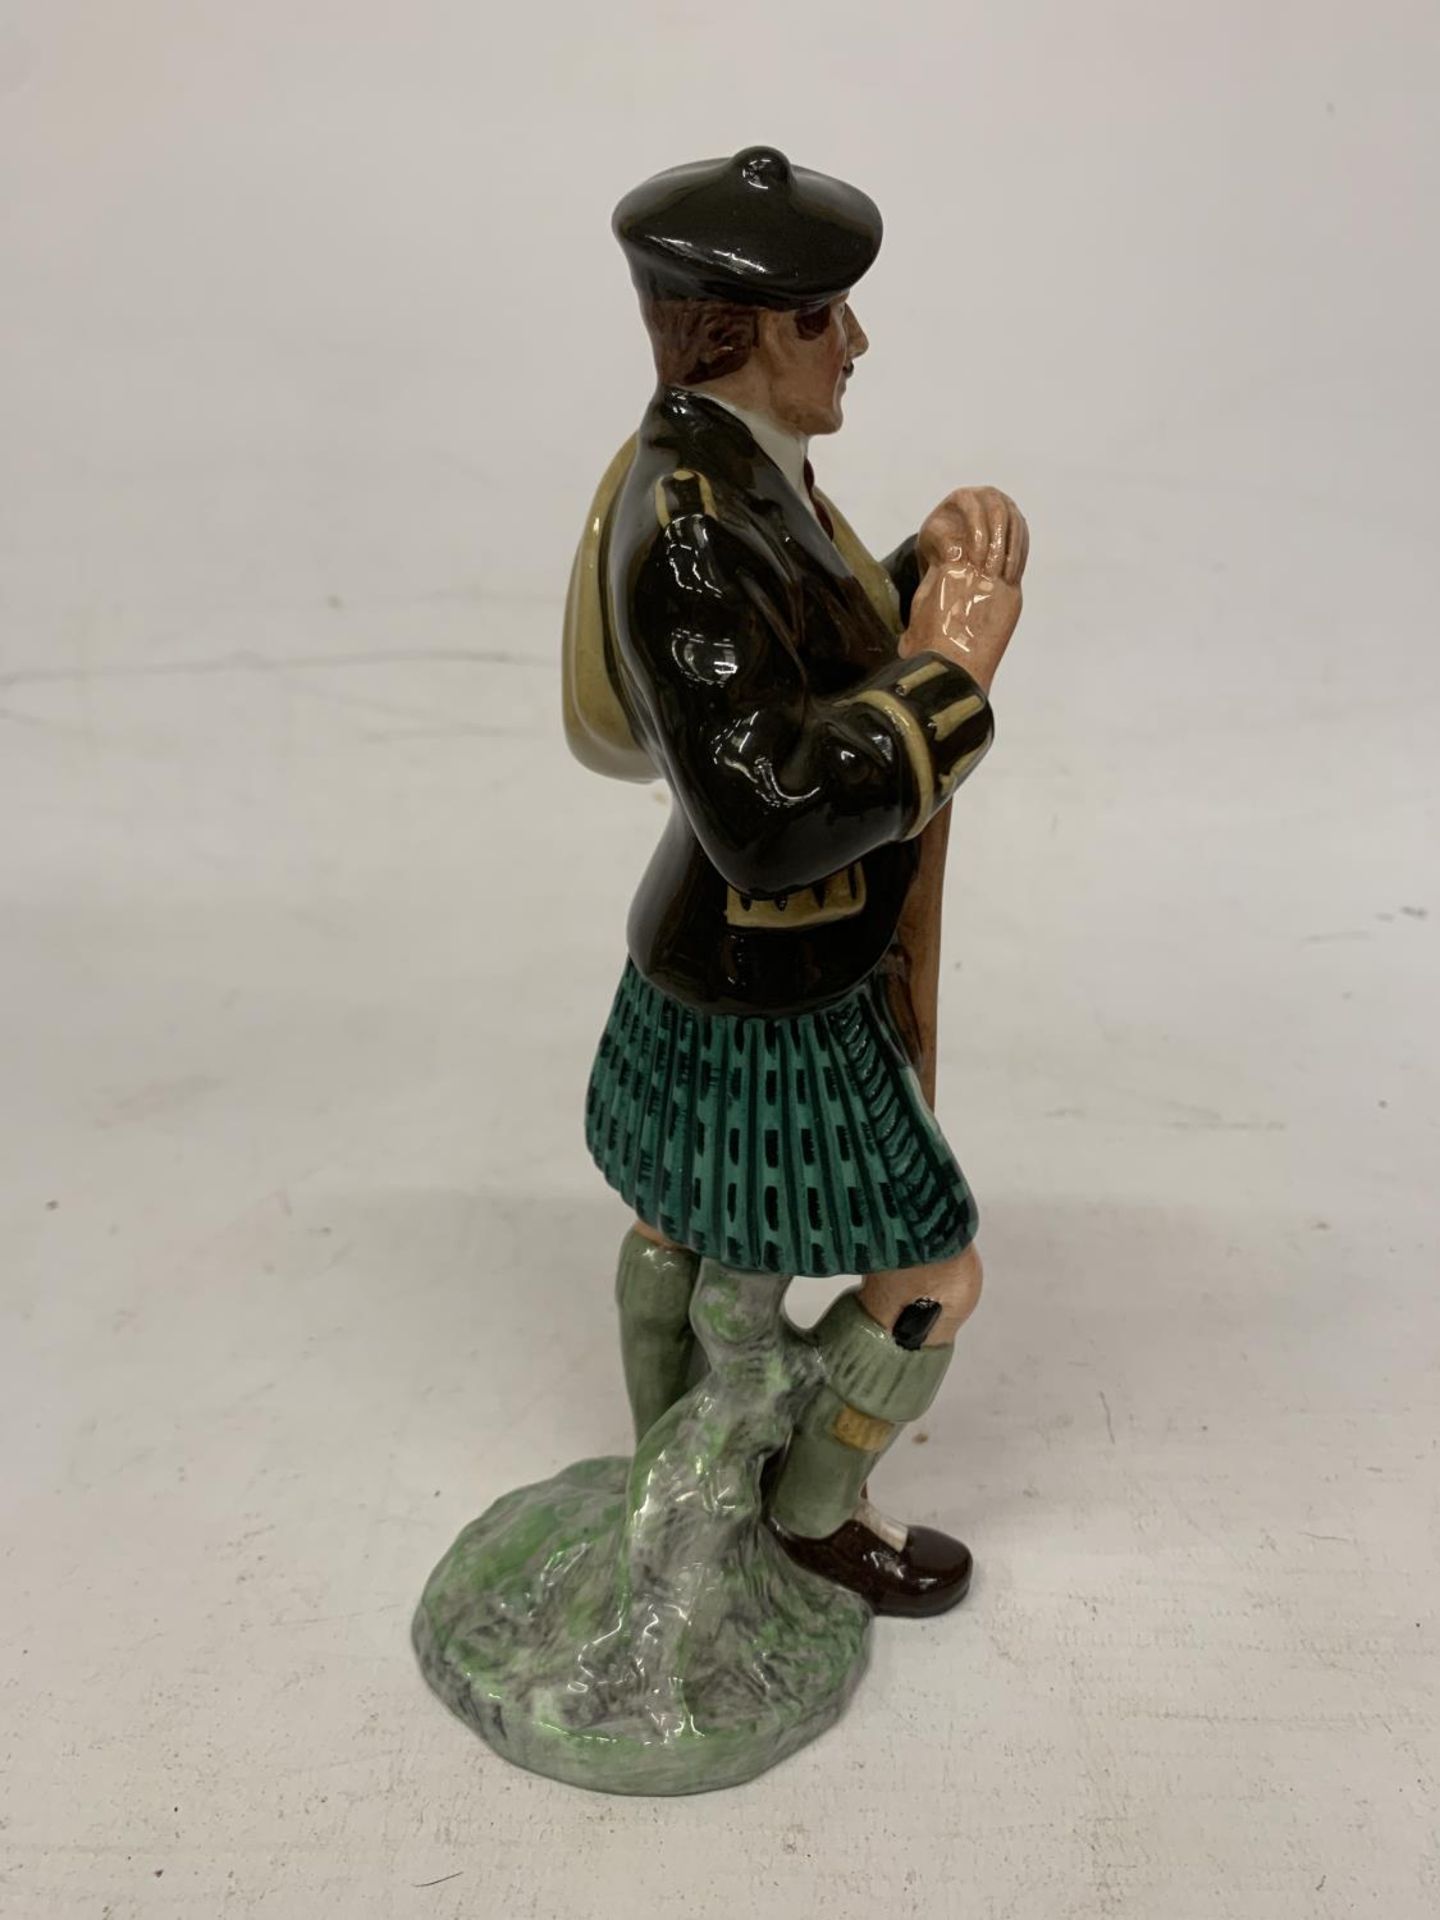 A ROYAL DOULTON FIGURE "THE LAIRD" HN 2361 - Image 2 of 4